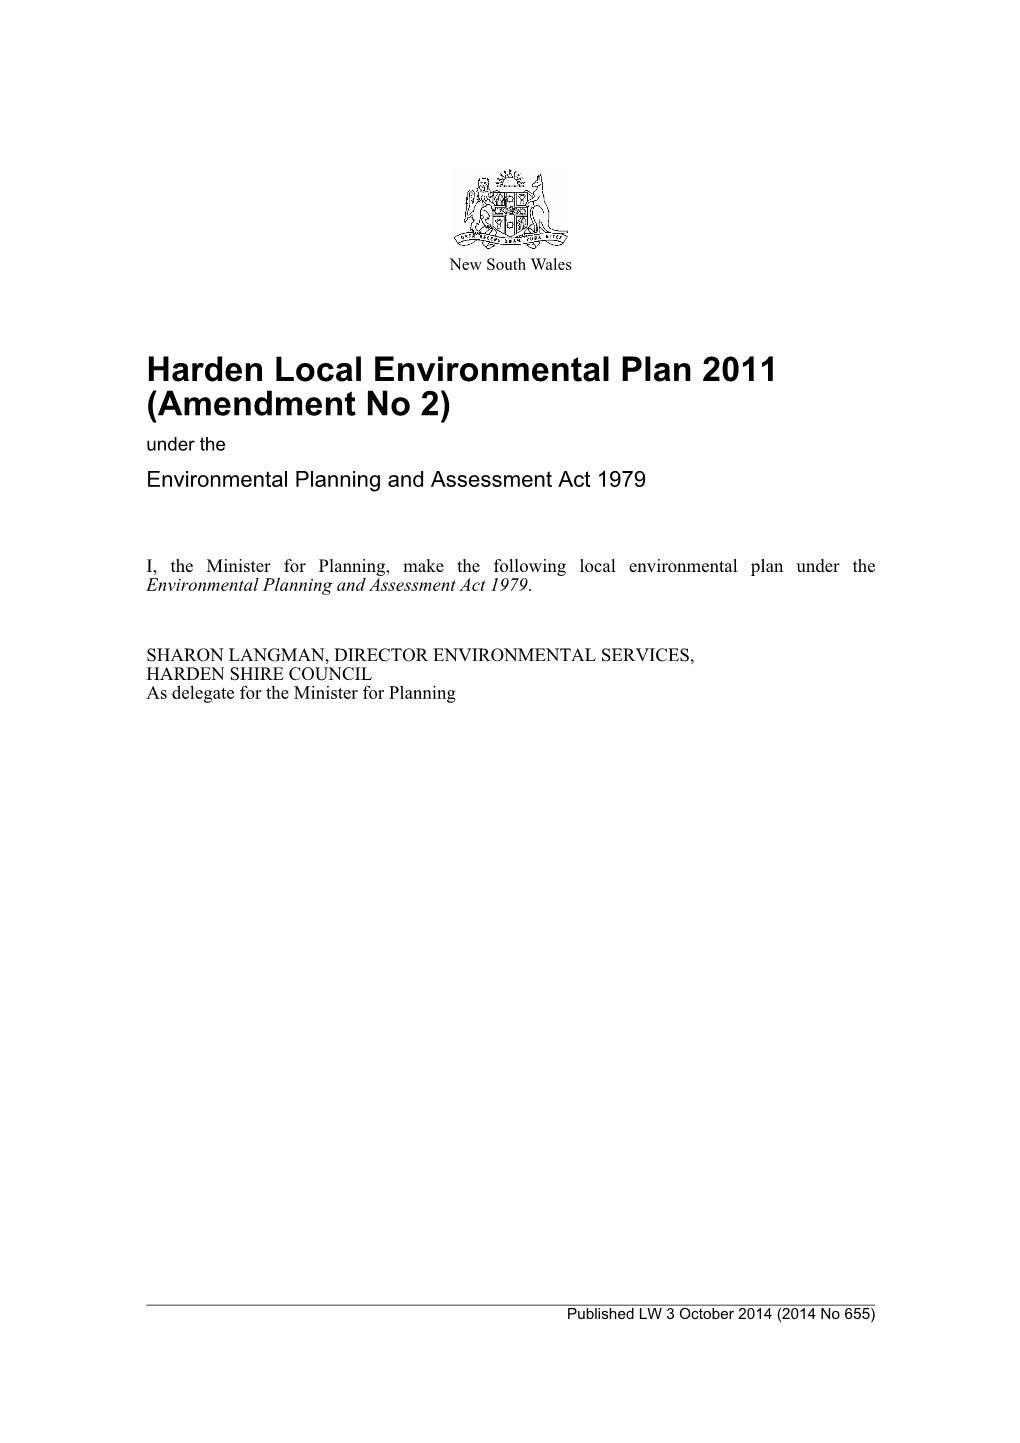 Harden Local Environmental Plan 2011 (Amendment No 2) Under the Environmental Planning and Assessment Act 1979